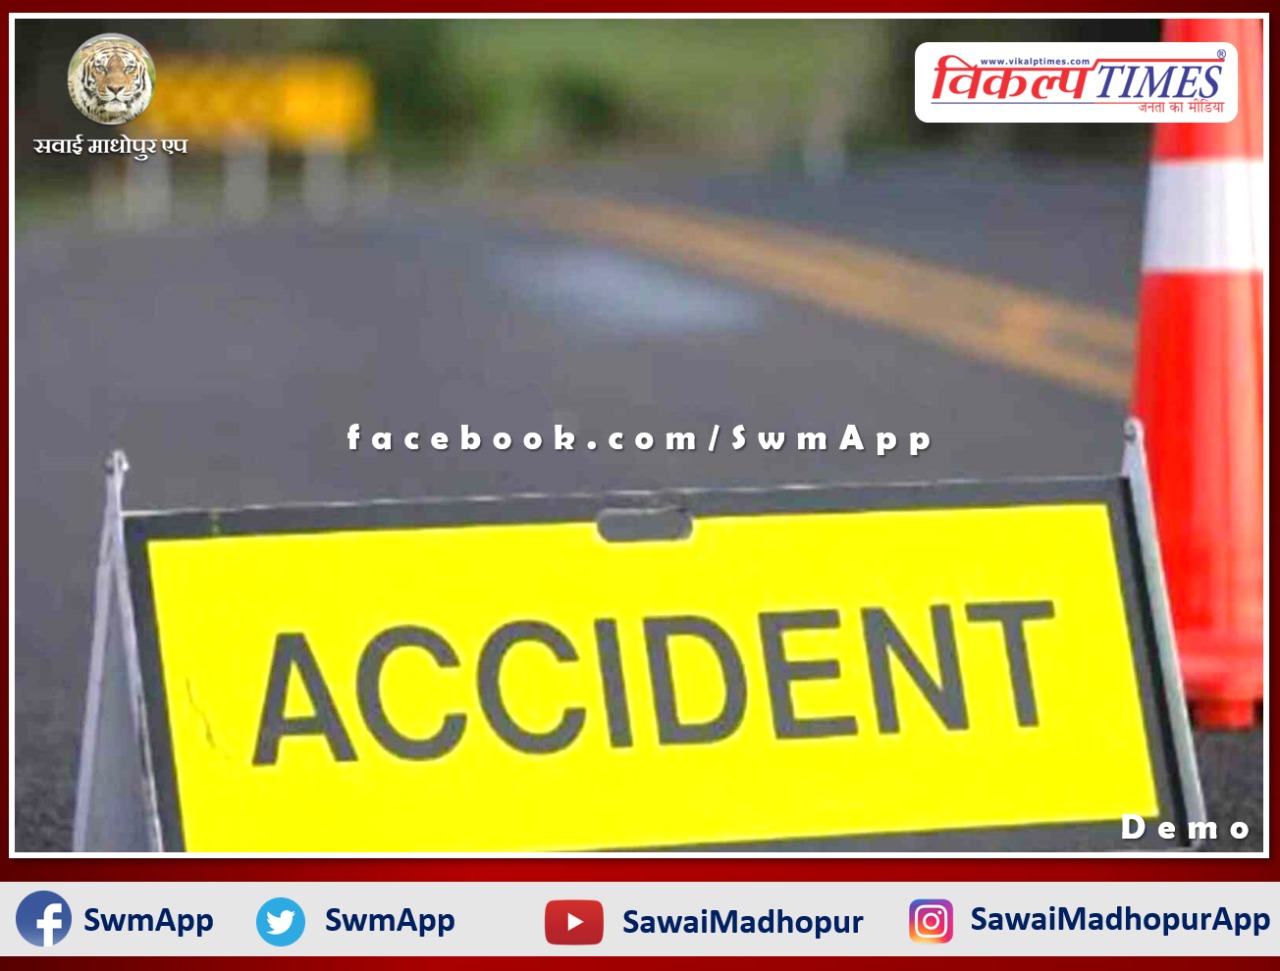 High speed pickup entered the house uncontrollably in malarna dungar, 3-year-old innocent died in the accident